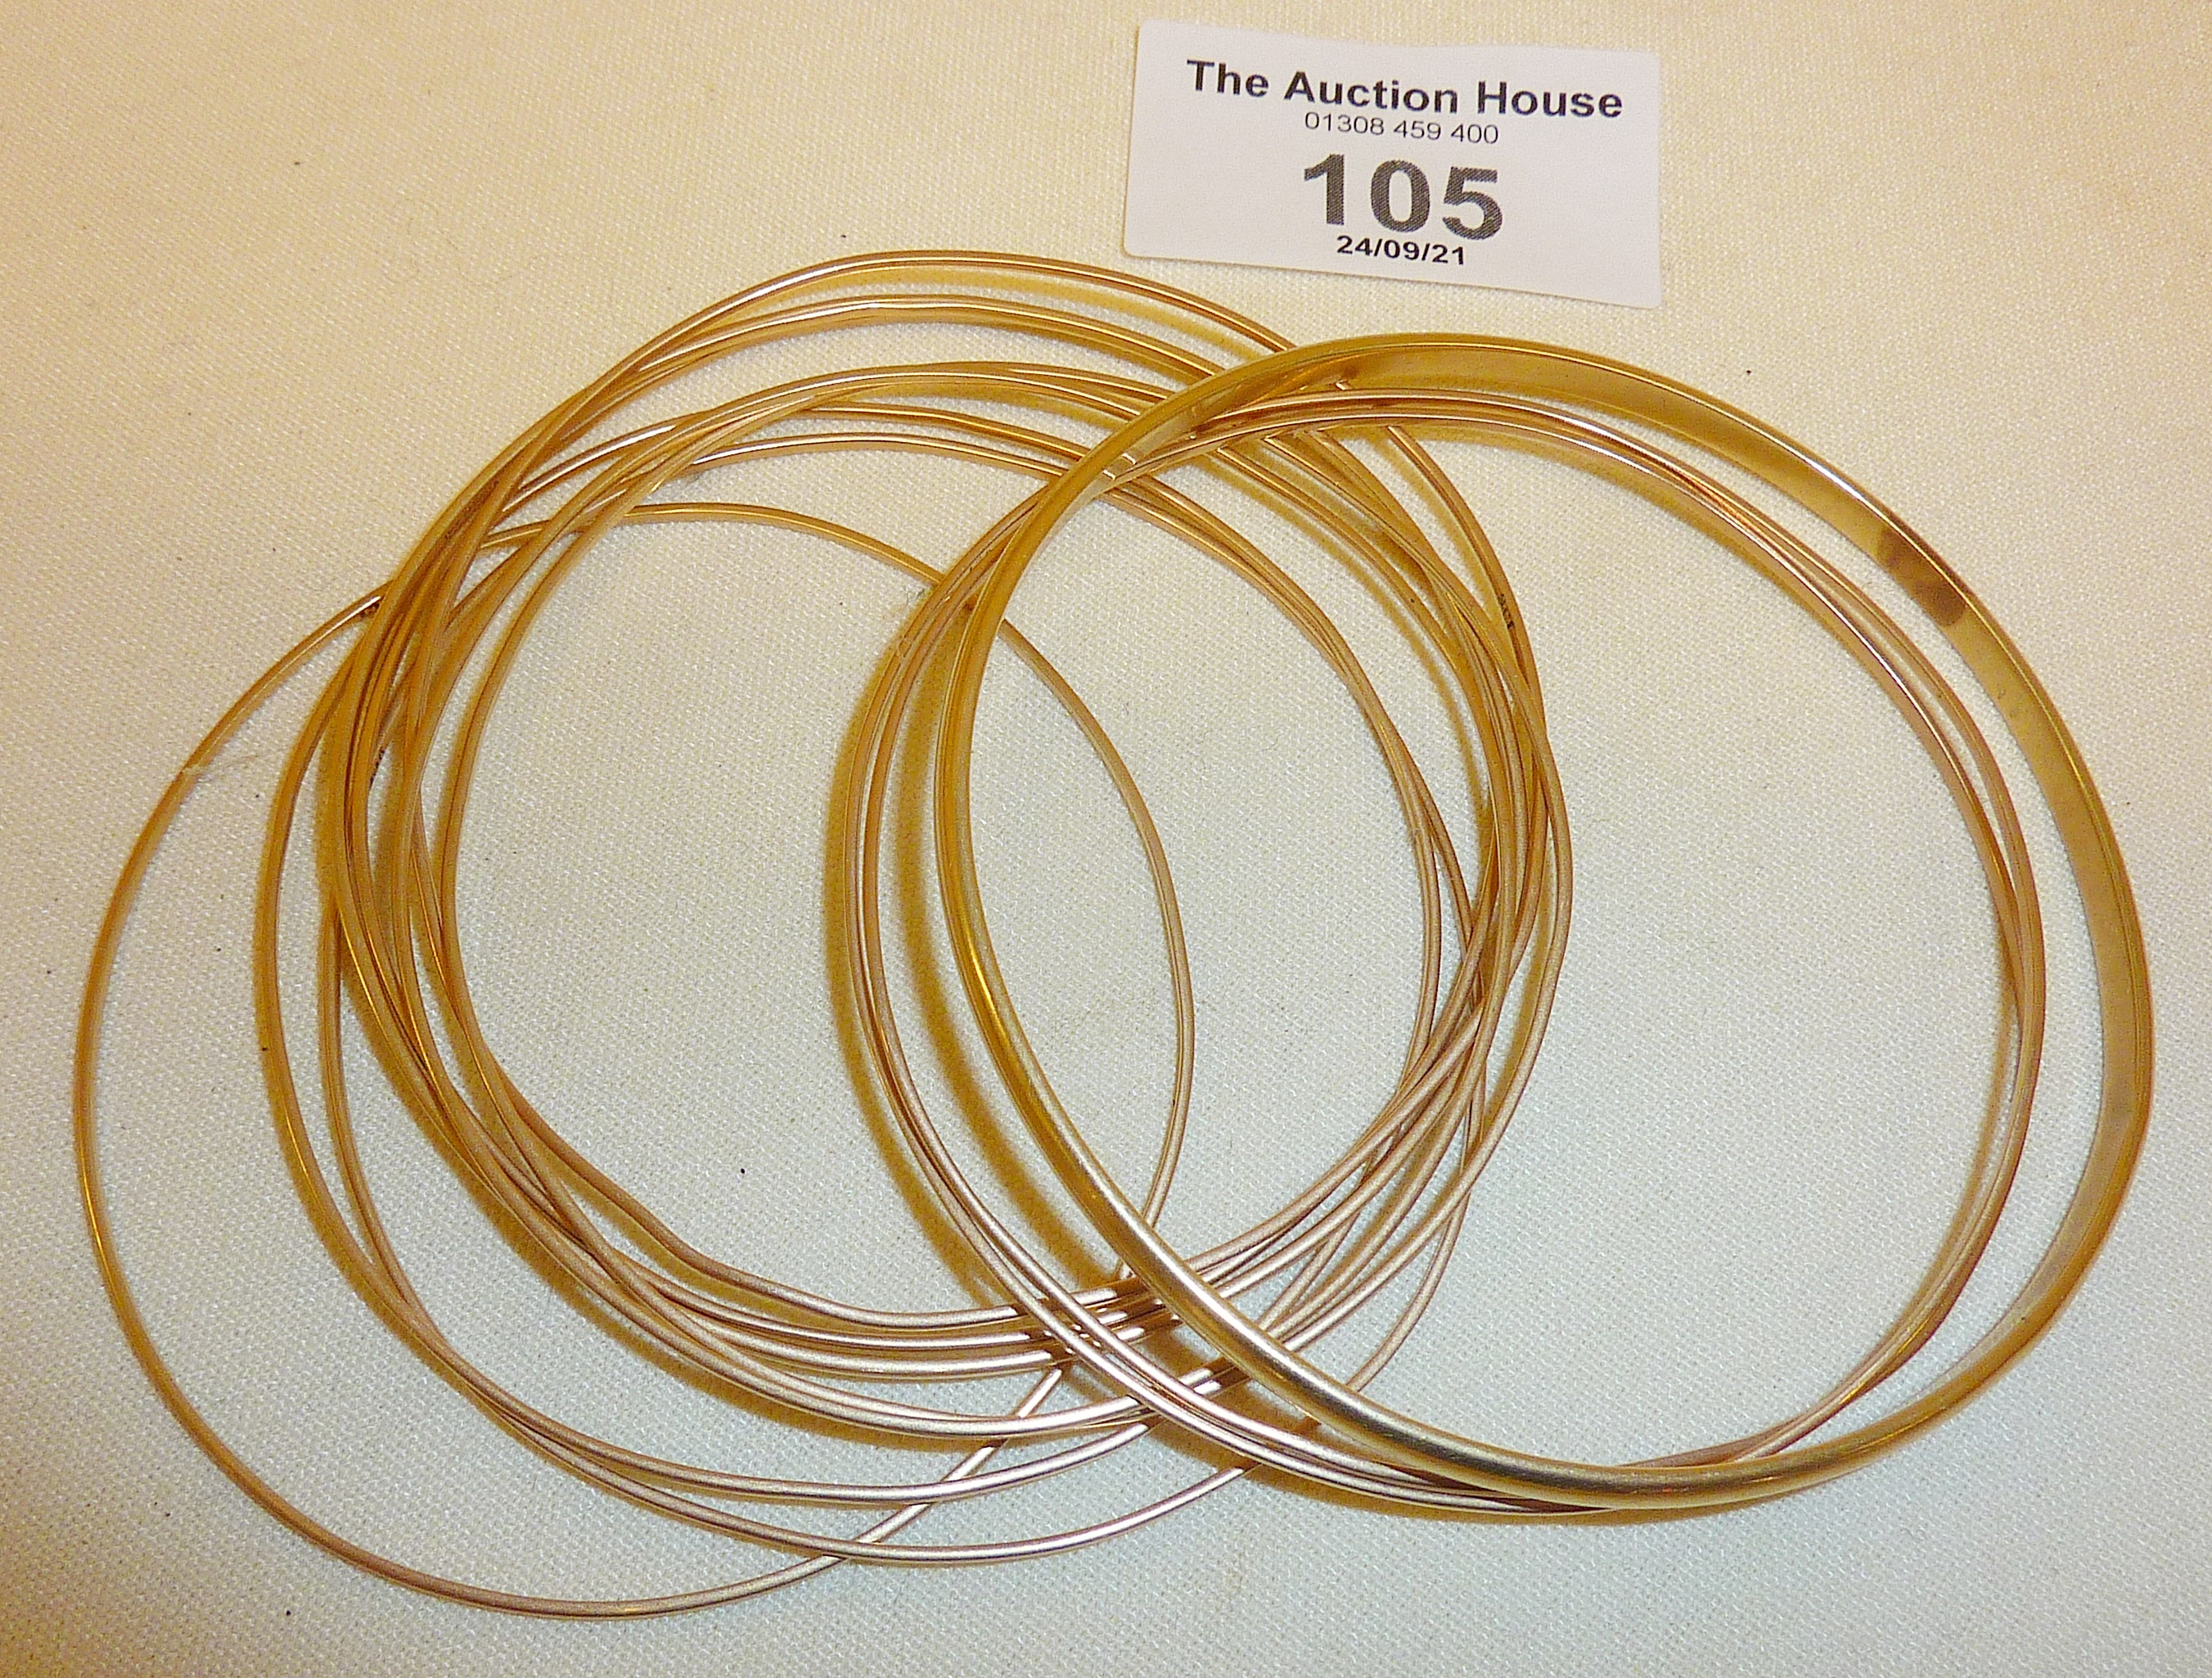 Eleven 9ct gold bangles (one marked, the rest untested), approx. 32g. in weight